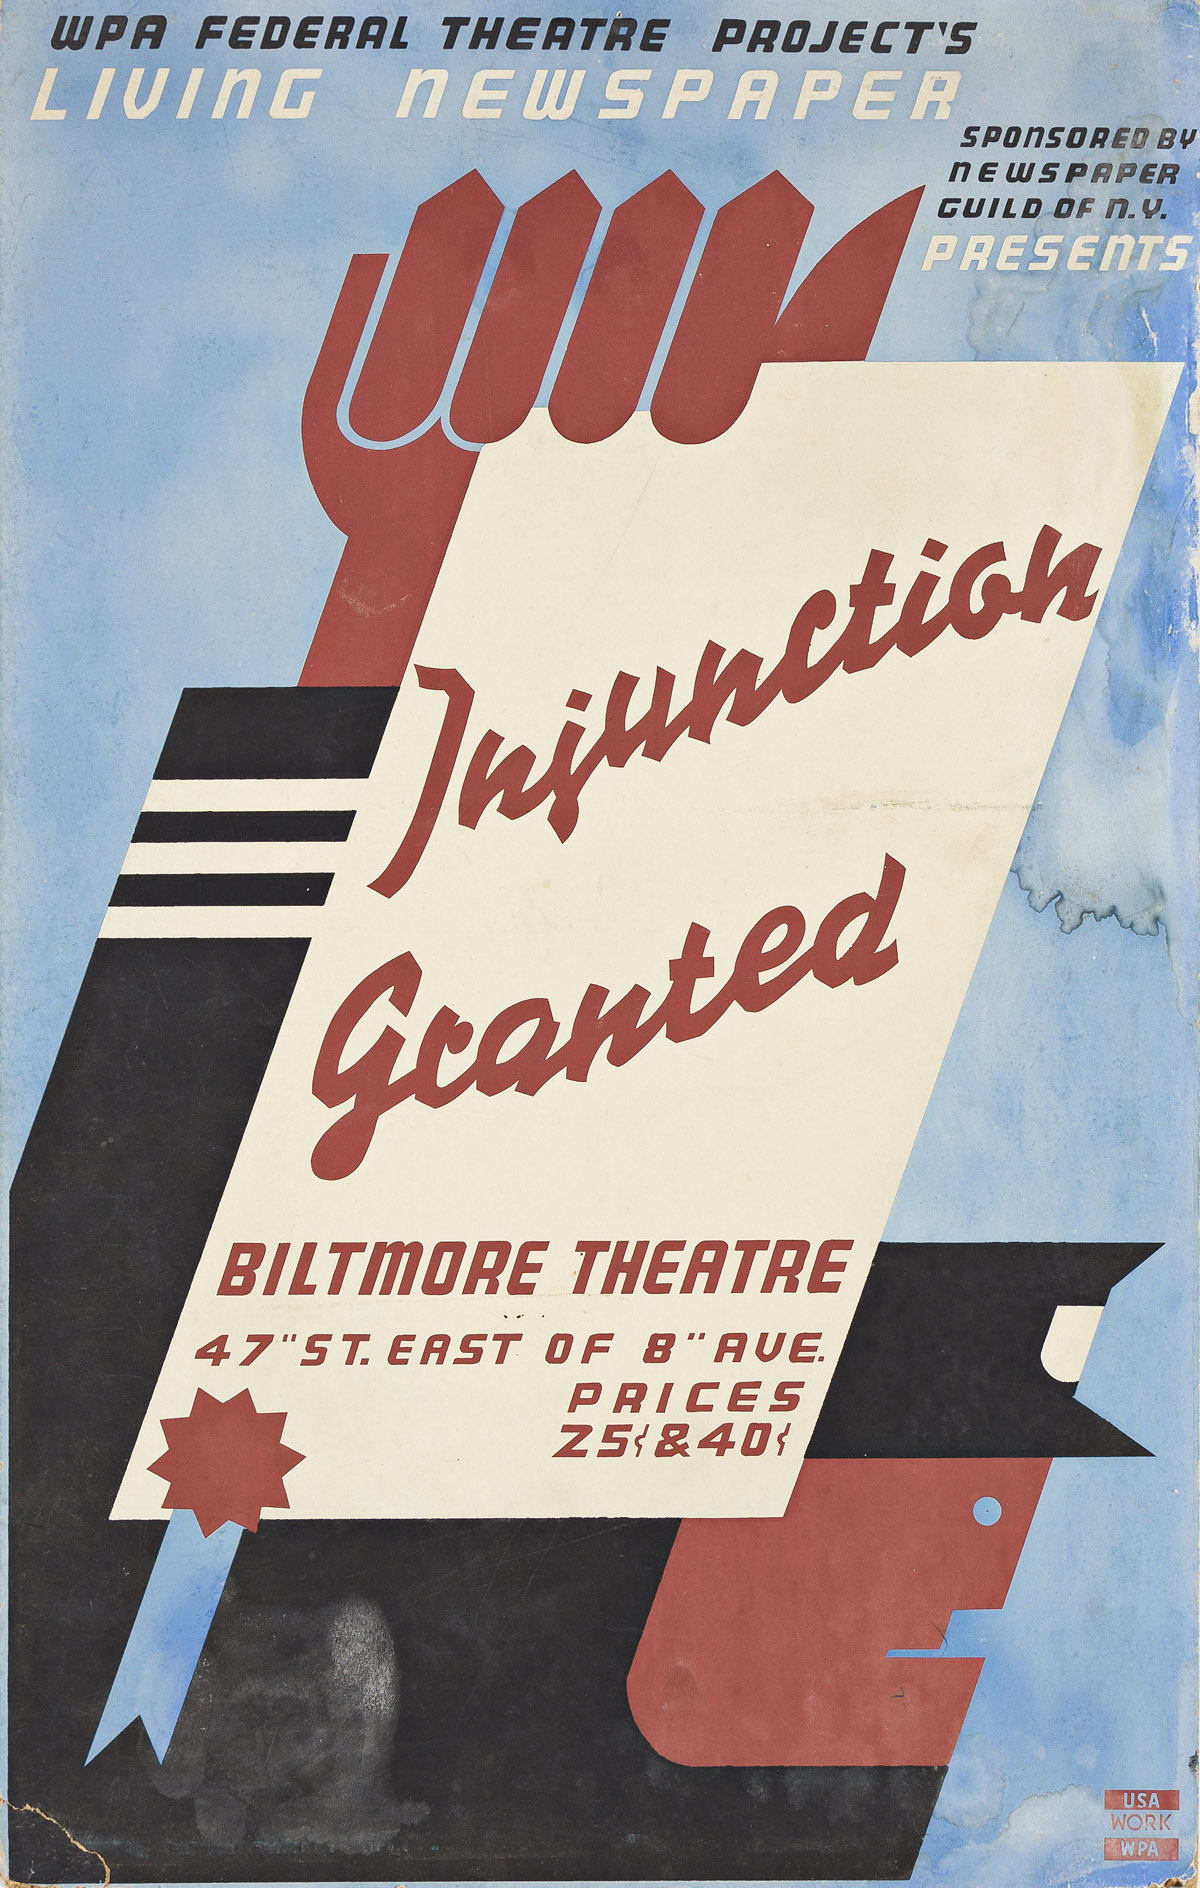 HARRY HERZOG (DATES UNKNOWN) Injunction Granted / WPA Federal Theatre Projects Living Newspaper.